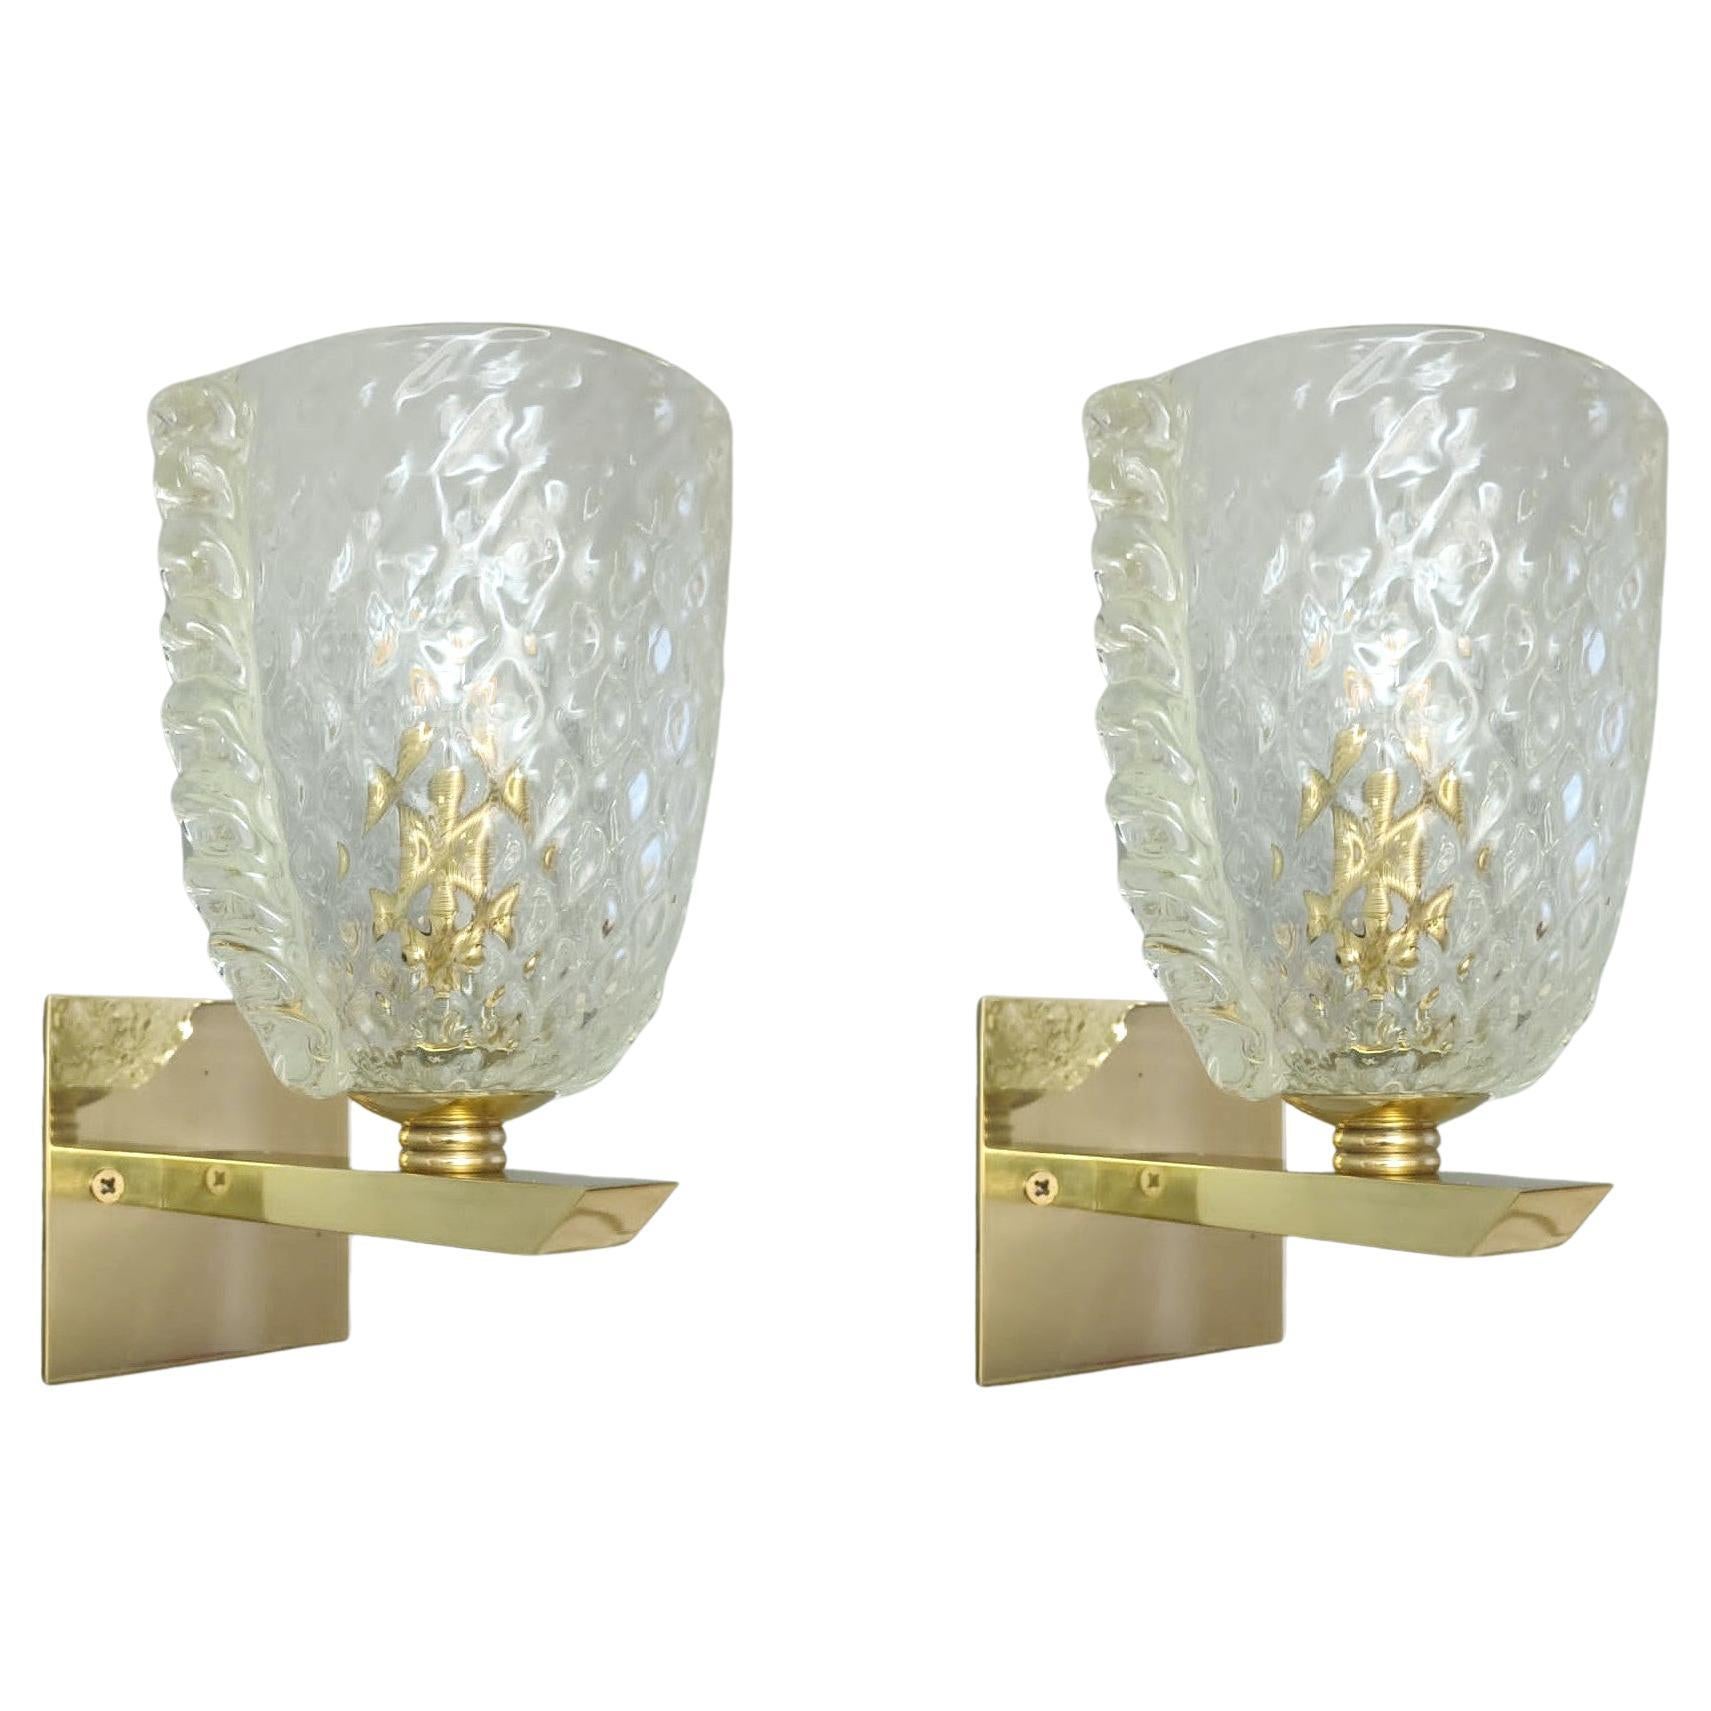 Pair of Clear Textured Sconces by Barovier e Toso, 2 Pairs Available